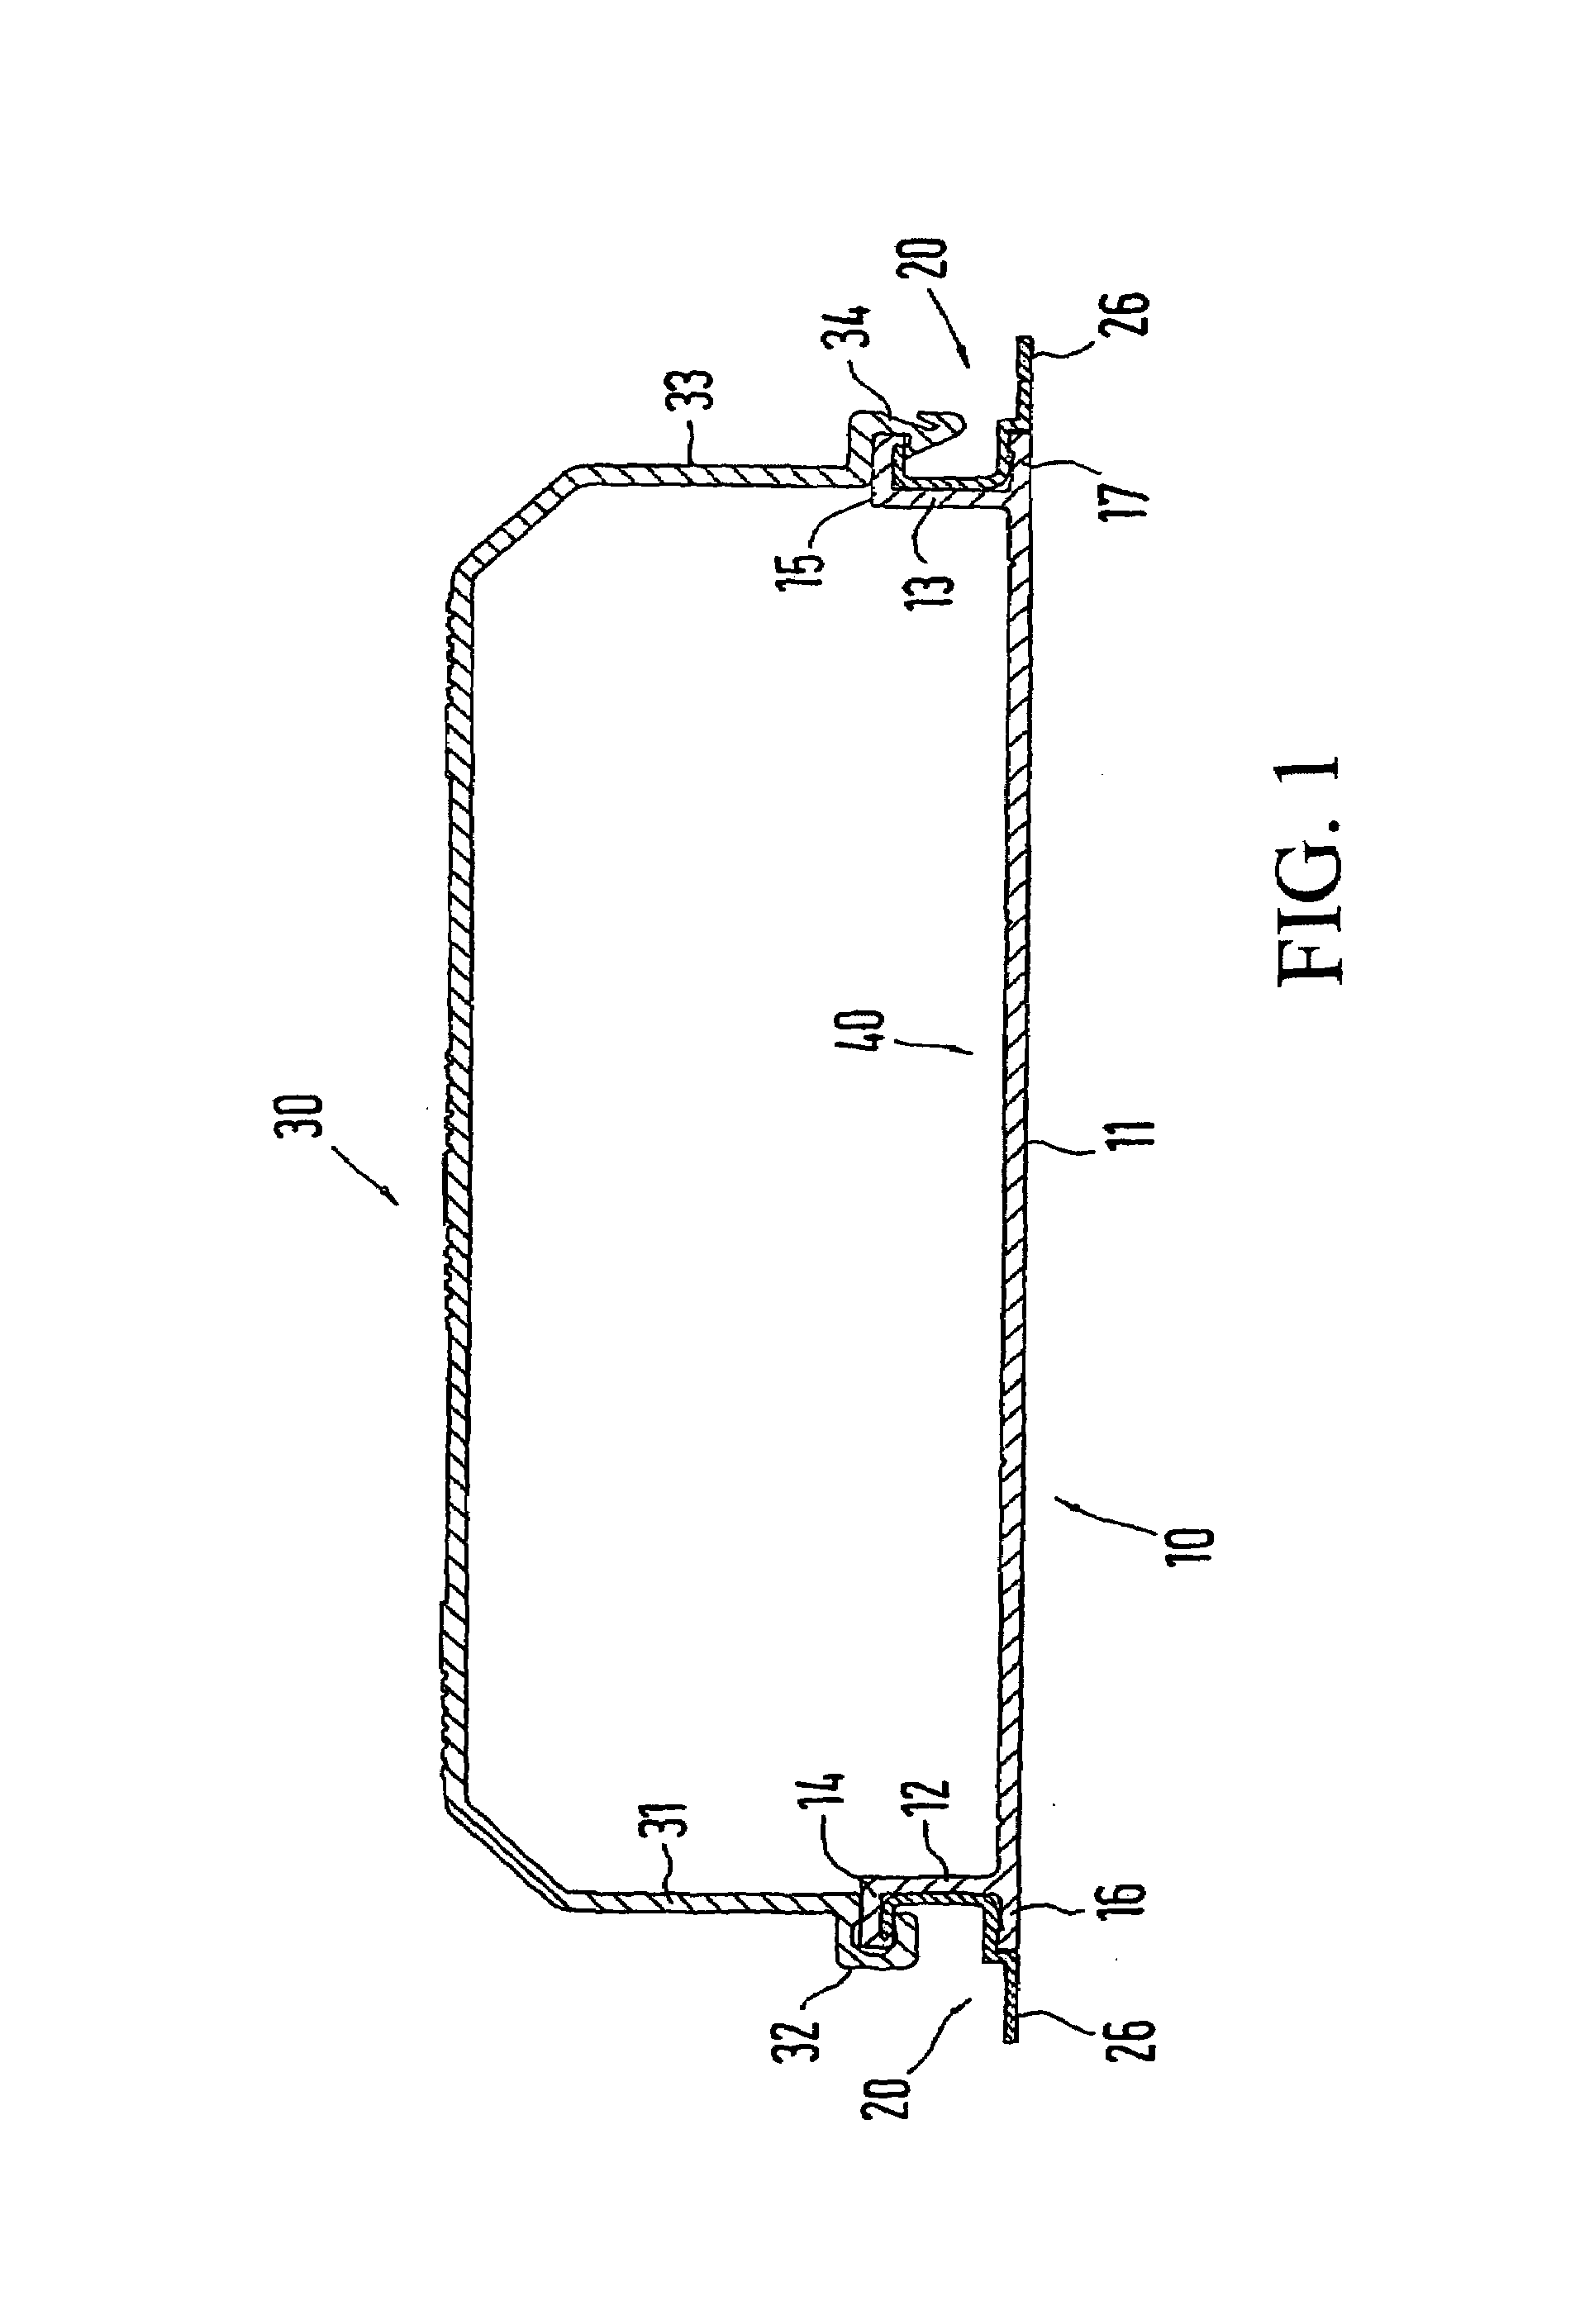 Bus bar system with assembly unit consisting of a base plate and fixing items